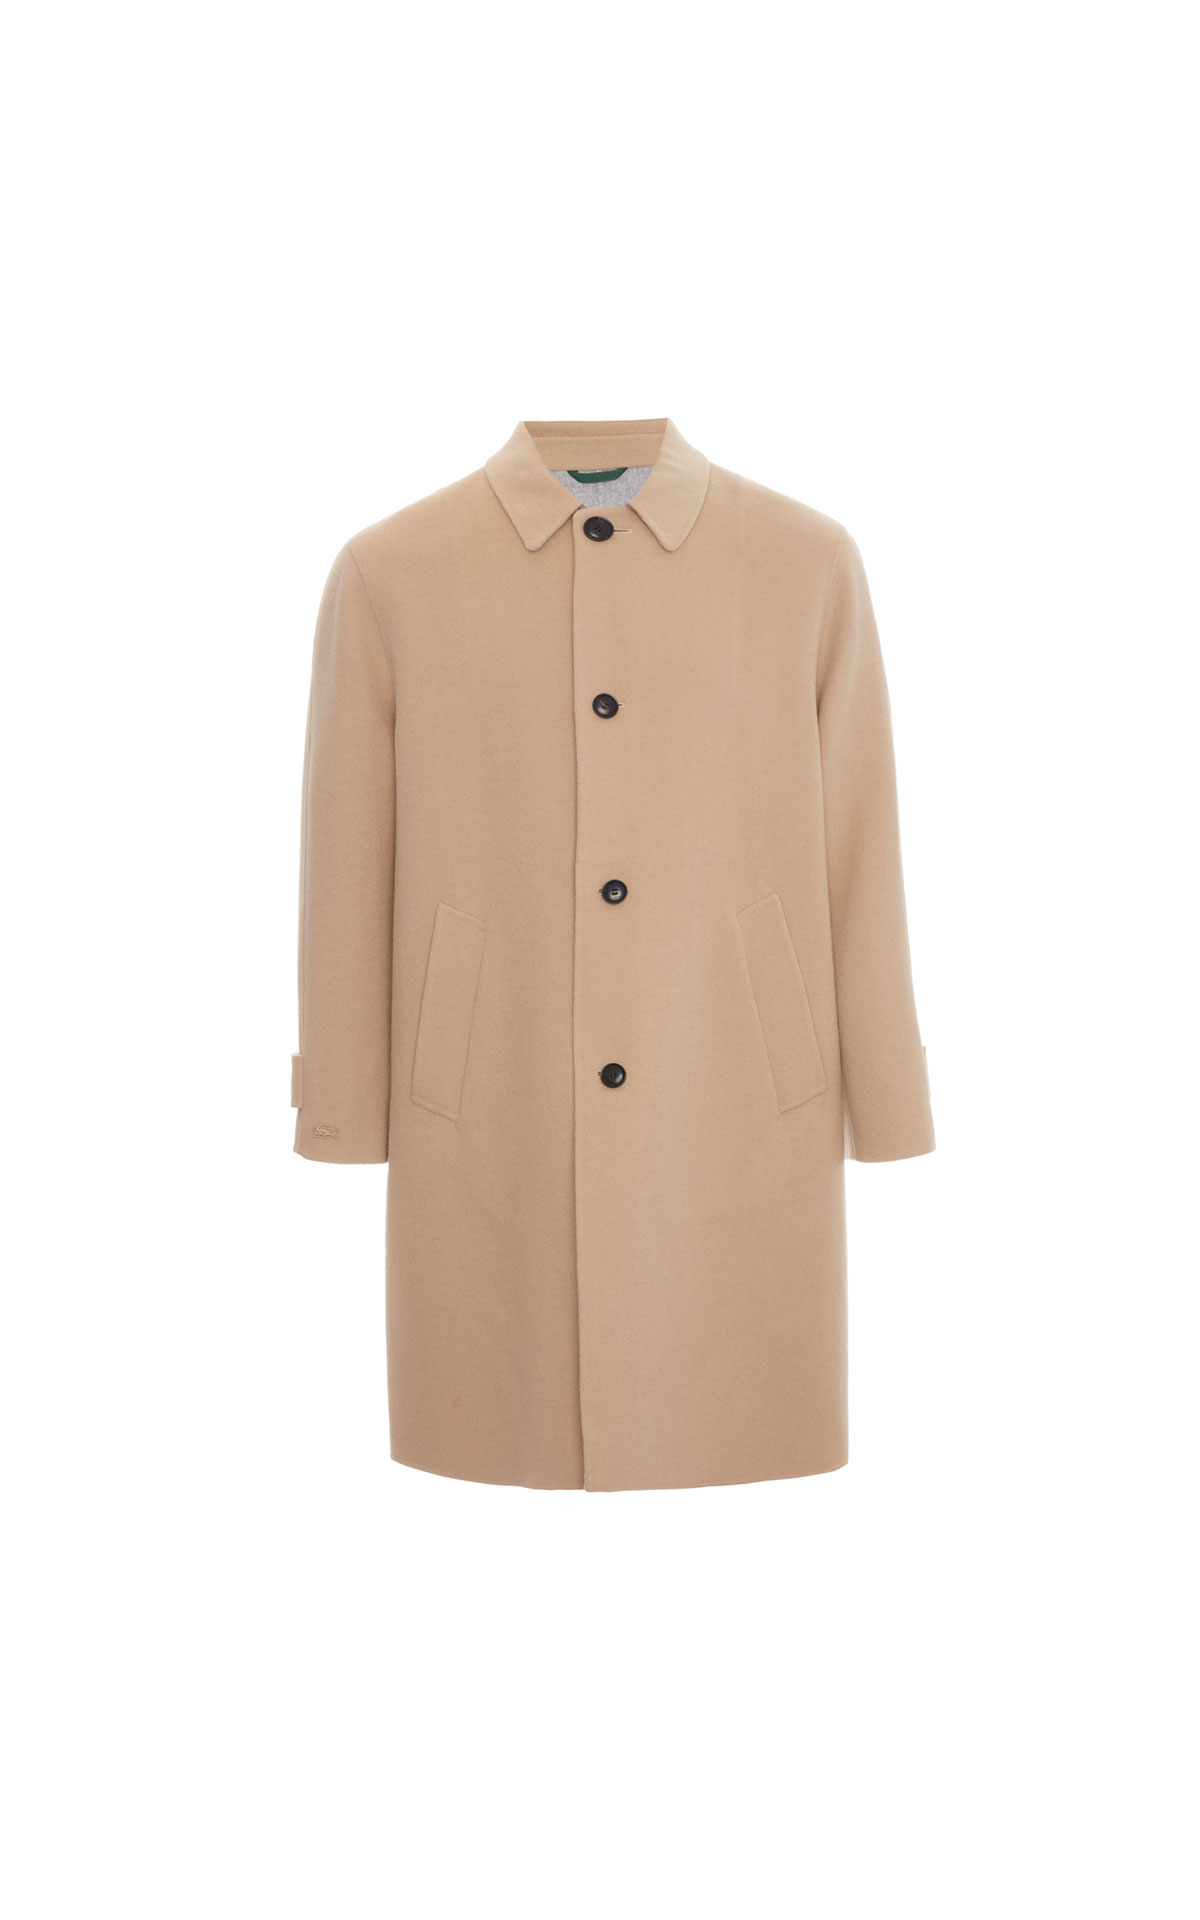 LACOSTE Wool coat from Bicester Village